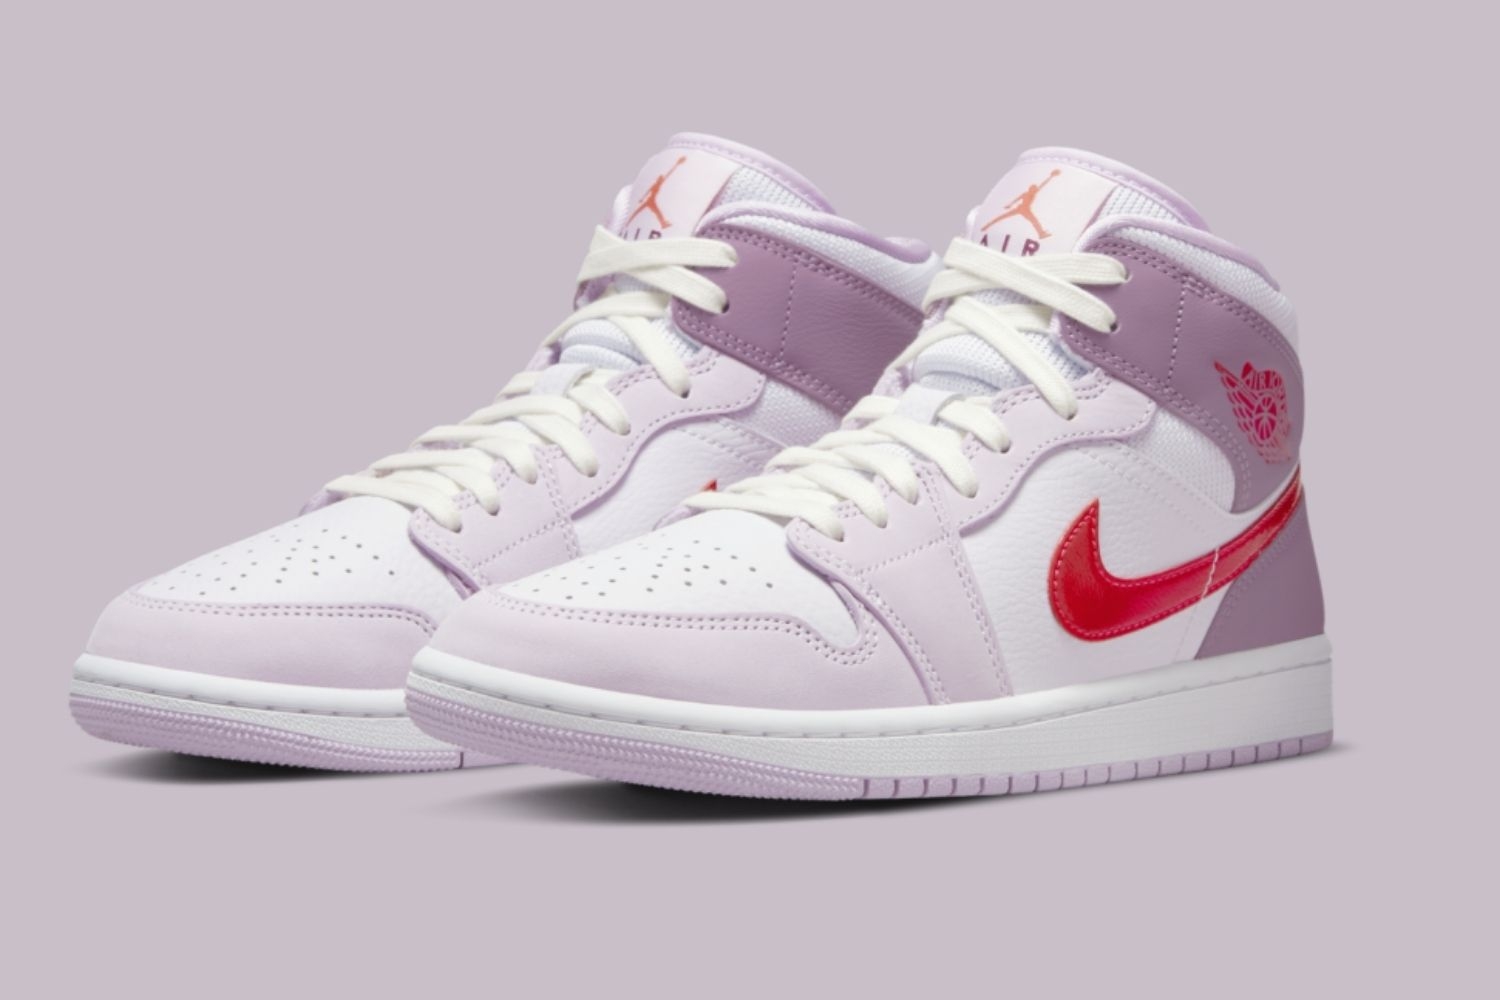 The Air Jordan 1 Mid 'Valentine's Day' drops in February 2022